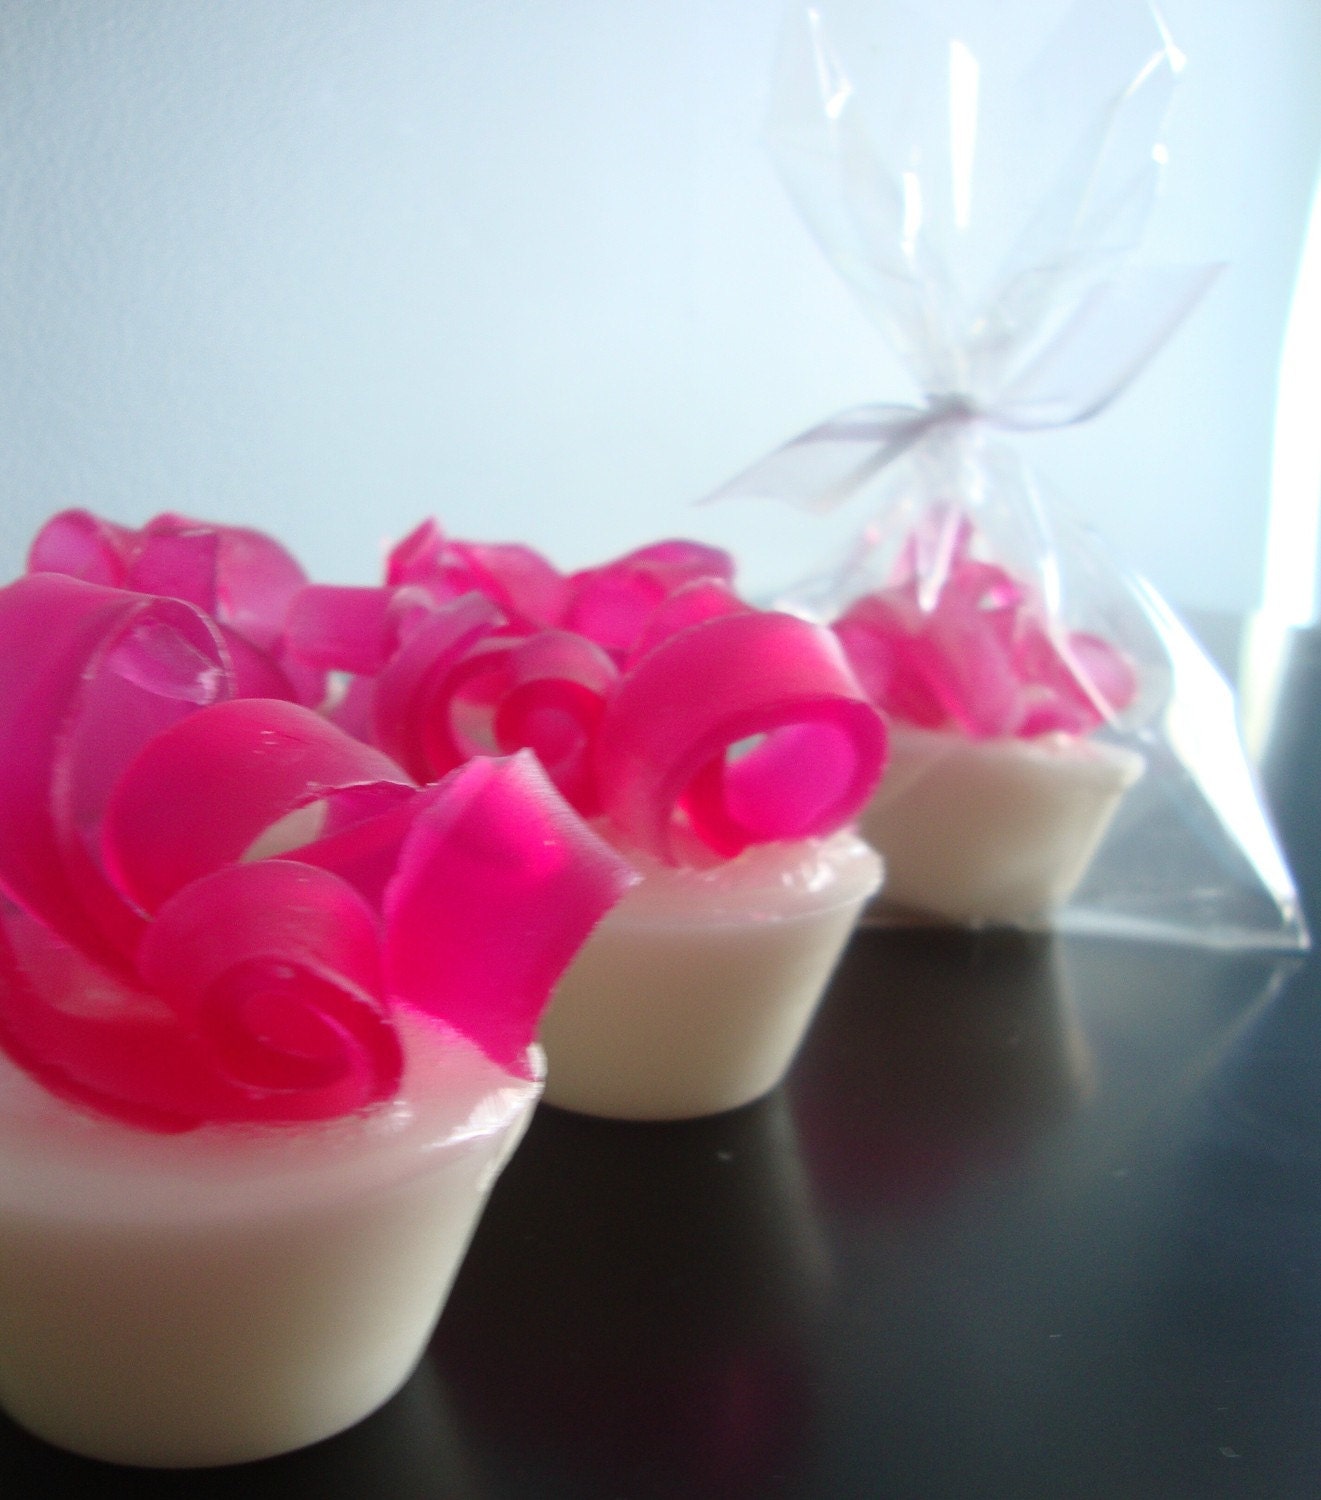 Set of 24 cupcake soaps By: Princess Buttercup